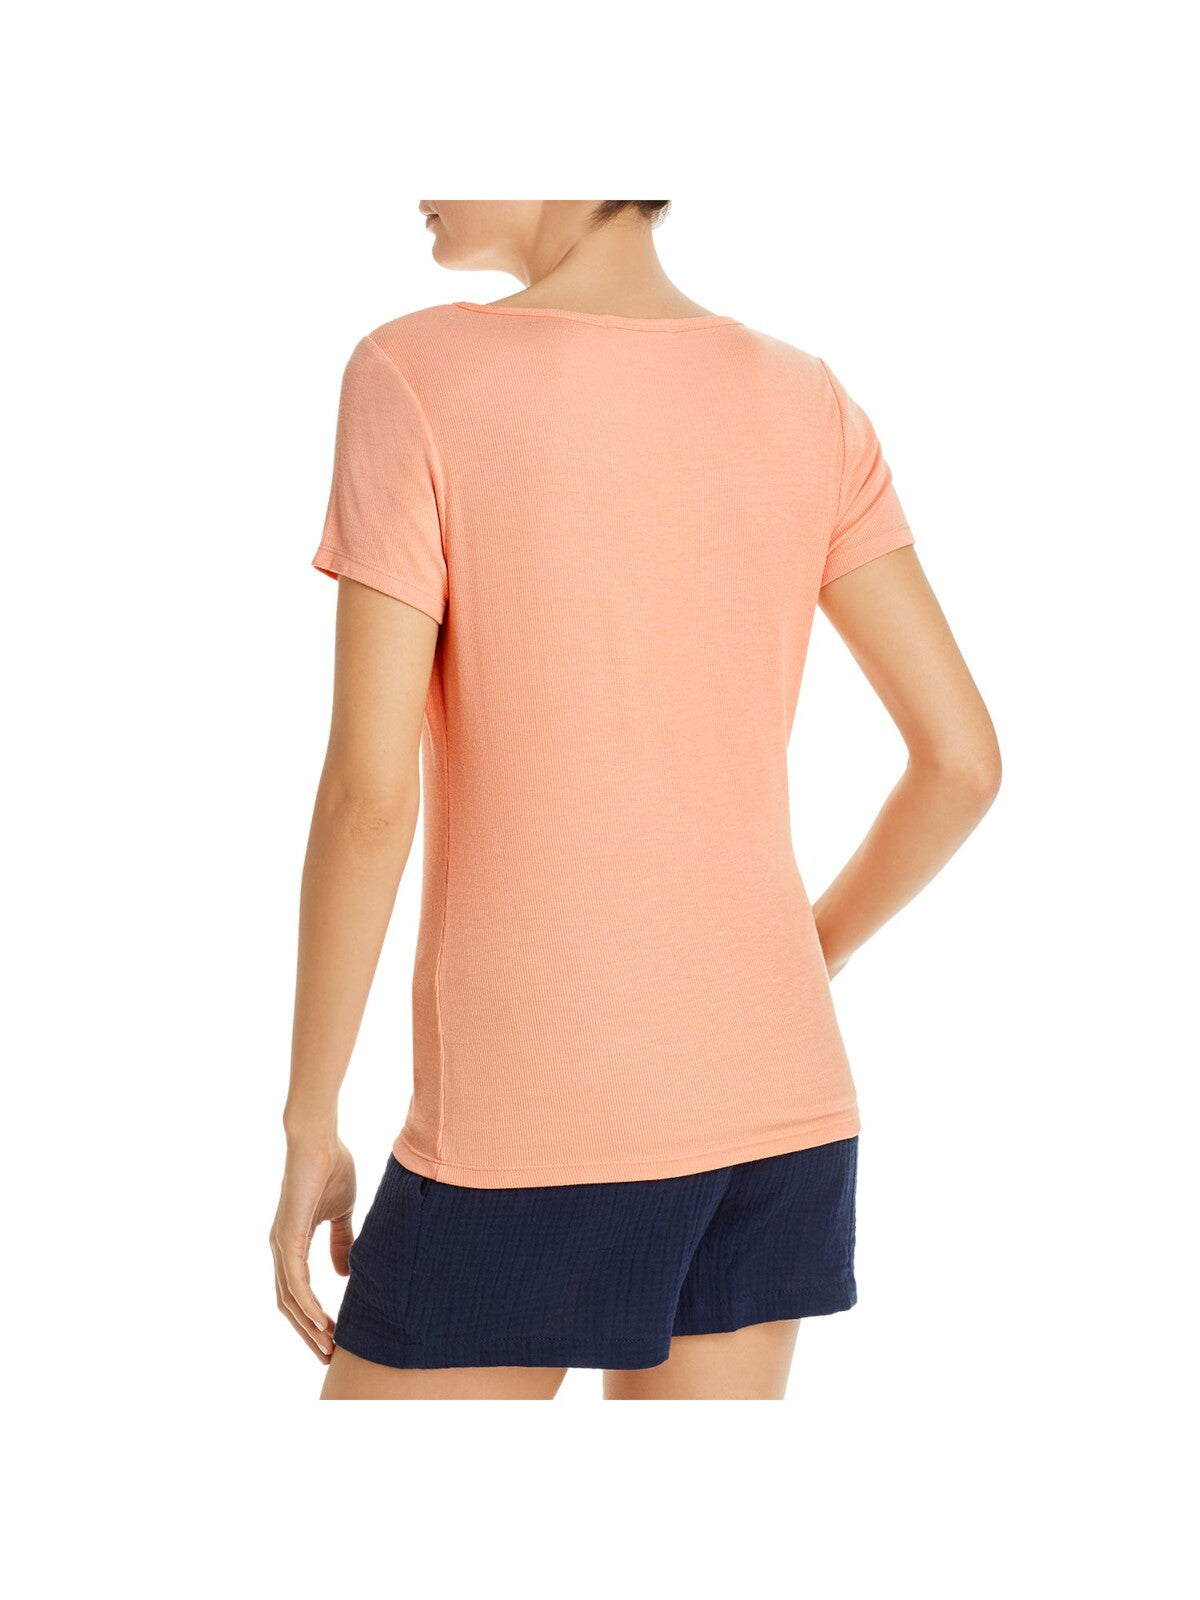 THREE DOTS Womens Coral Ribbed Short Sleeve Scoop Neck T-Shirt M